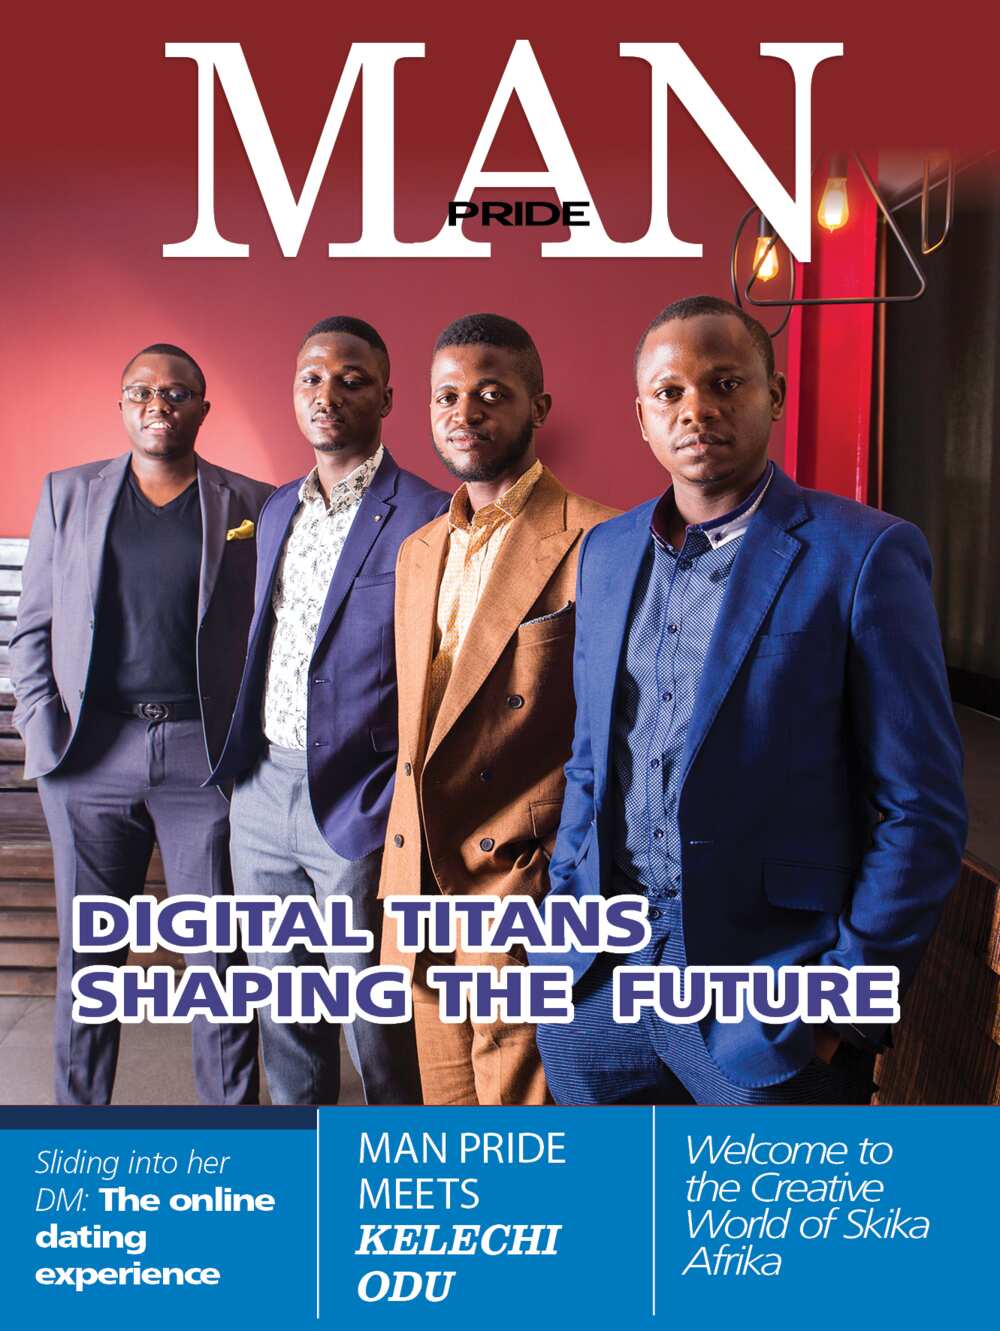 Pride Magazine Nigeria’s Digital Speaks Edition to be unveiled at the 2020 Virtual Pride Women Conference